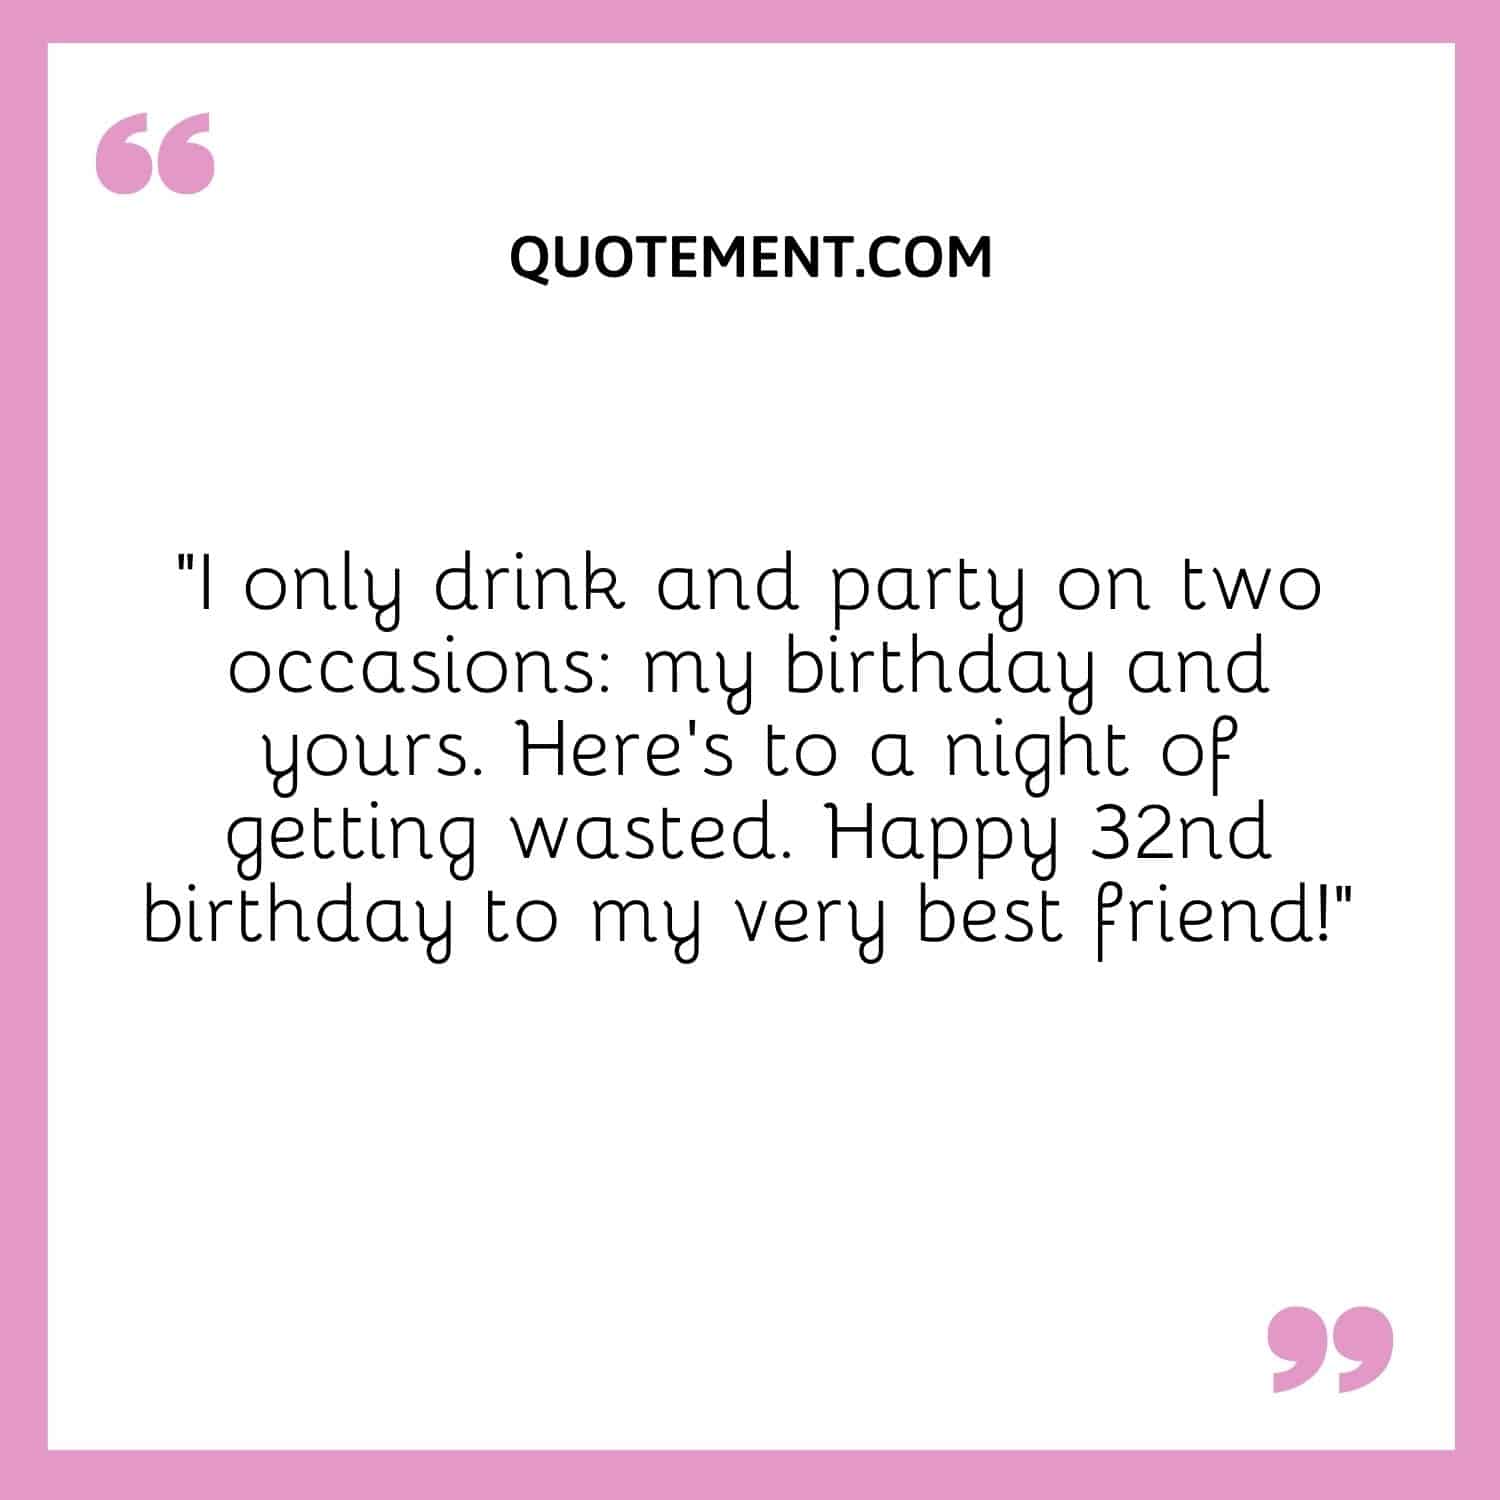 “I only drink and party on two occasions my birthday and yours. Here’s to a night of getting wasted. Happy 32nd birthday to my very best friend!”